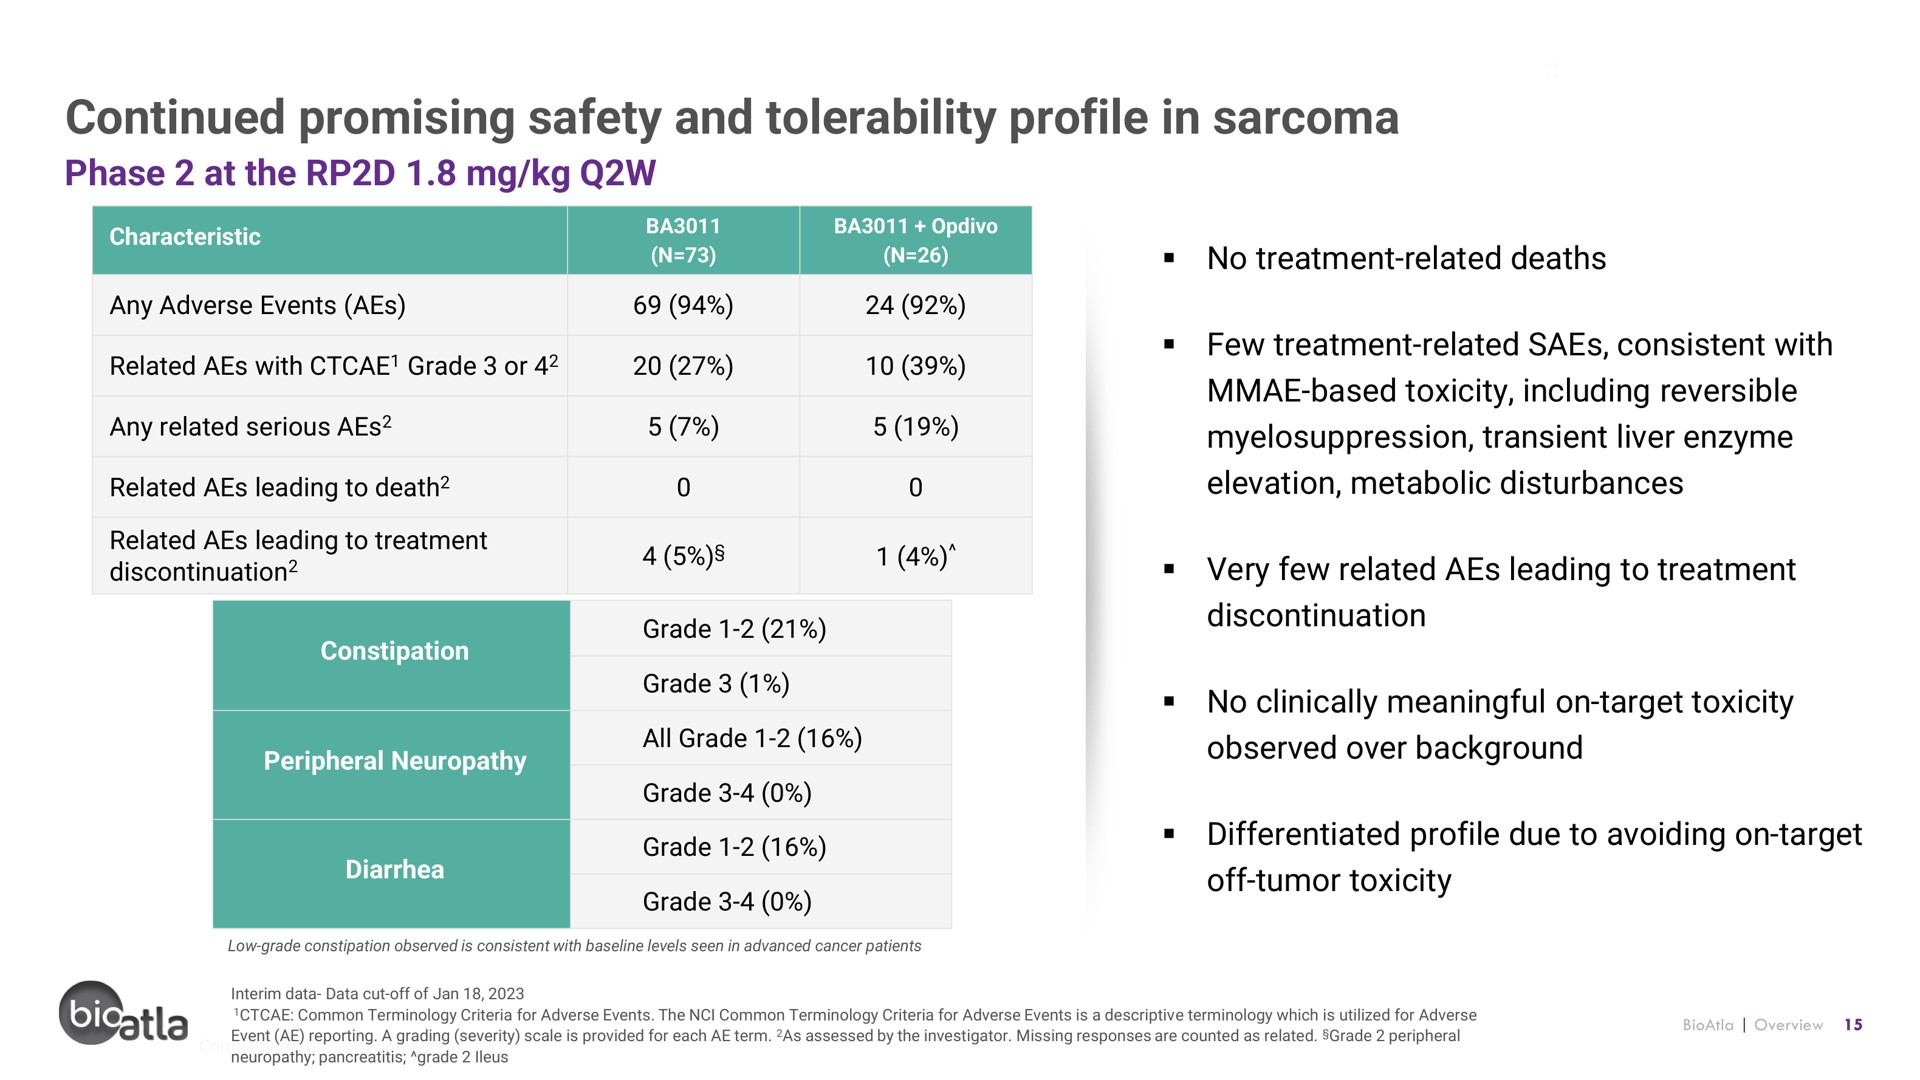 continued promising safety and tolerability profile in sarcoma | BioAtla